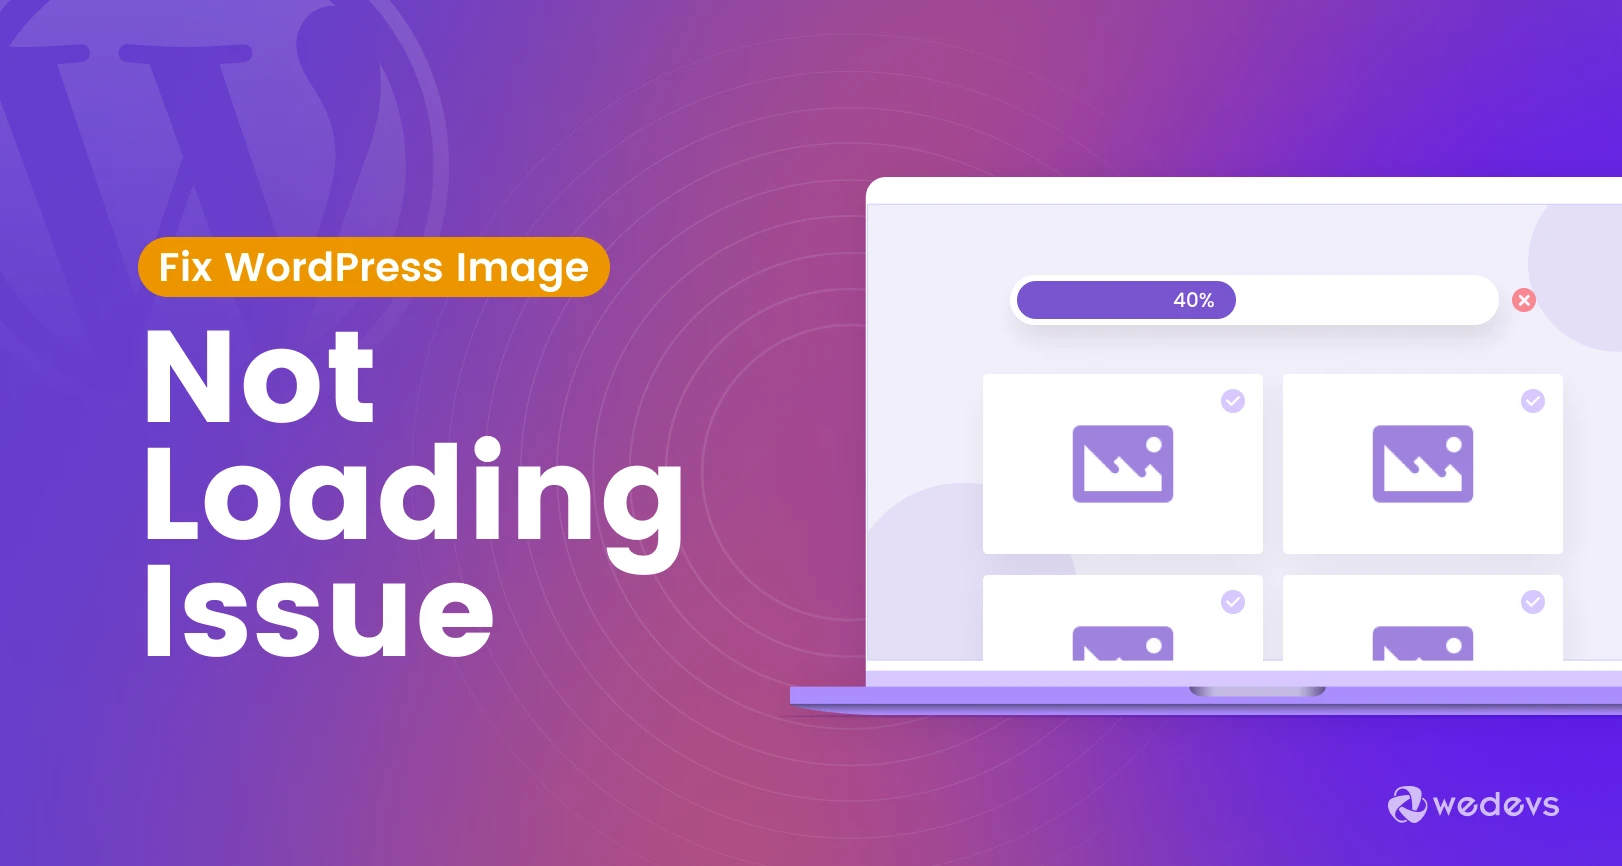 How To Fix WordPress Image Not Loading Issue: 9 Proven Ways